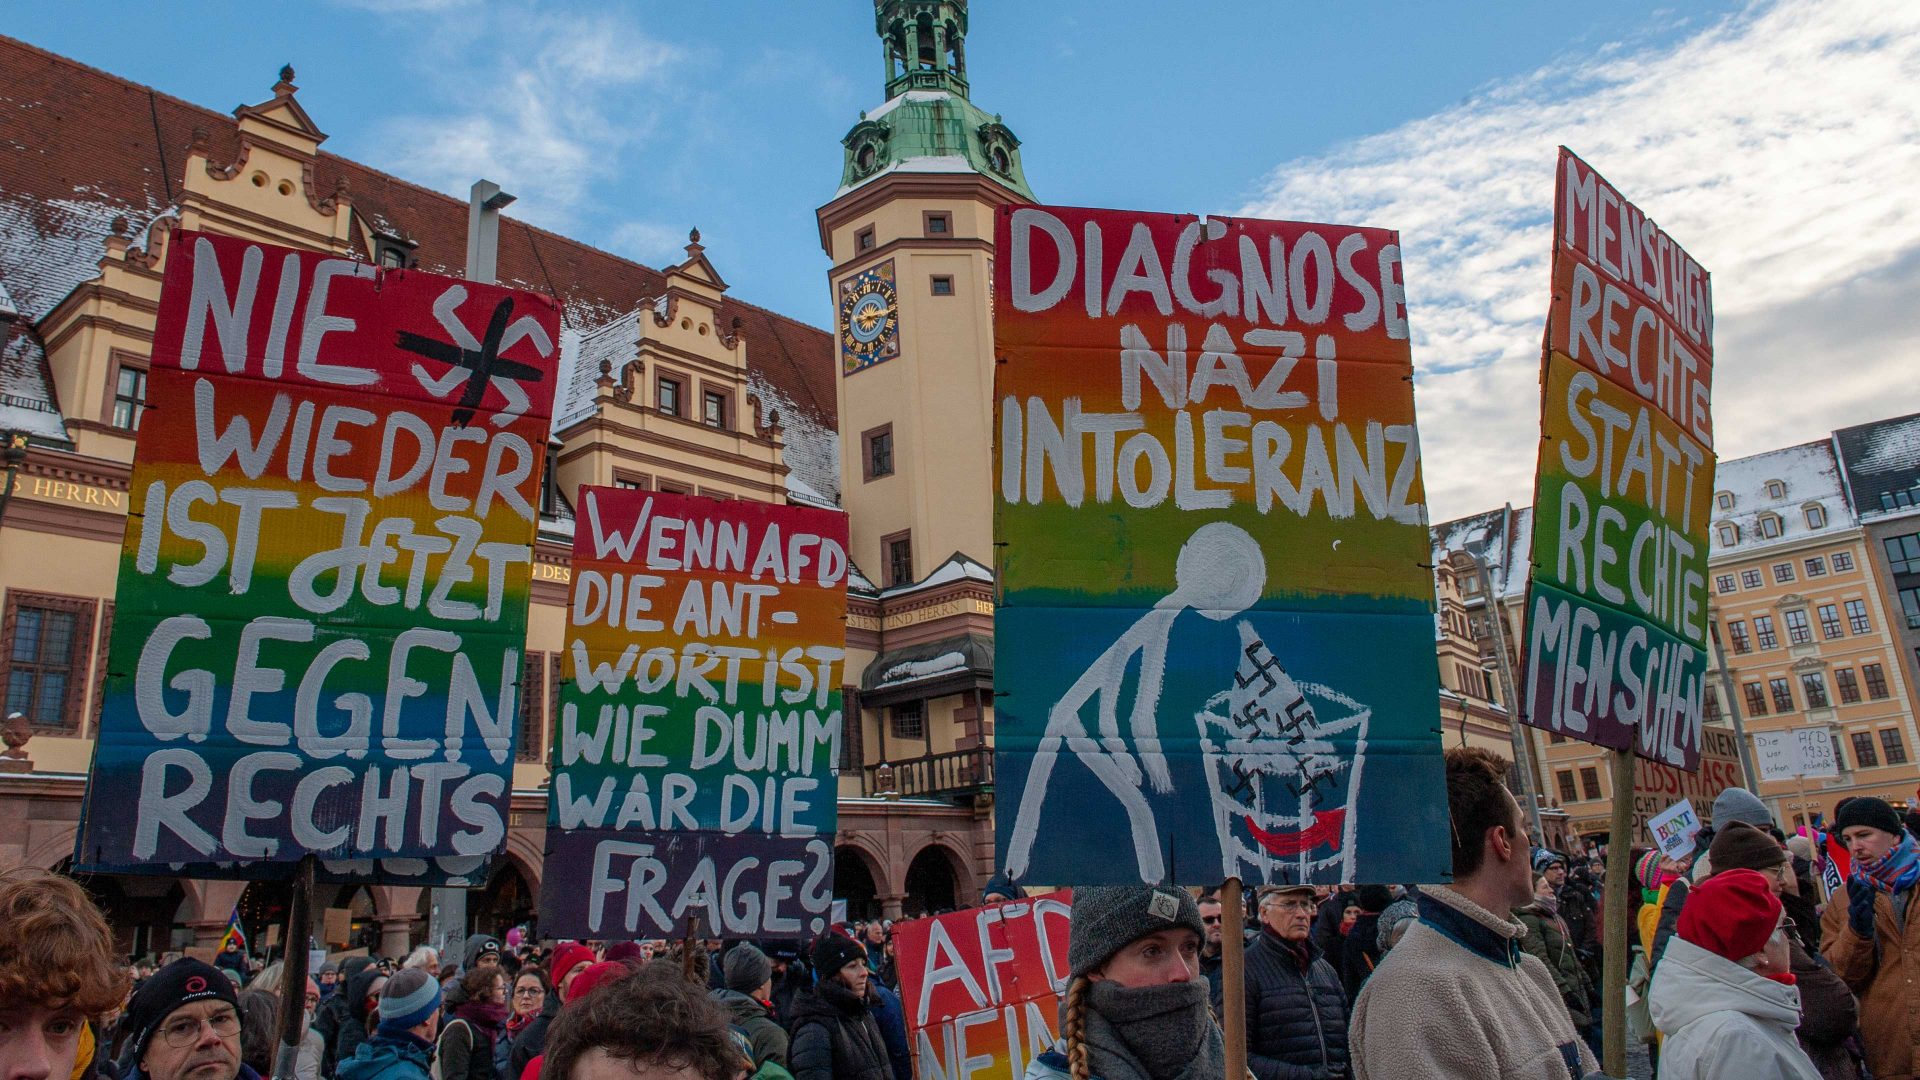 People gather to protest against the far-right Alternative for Germany (AfD) political party. Photo: Craig Stennett/Getty Images